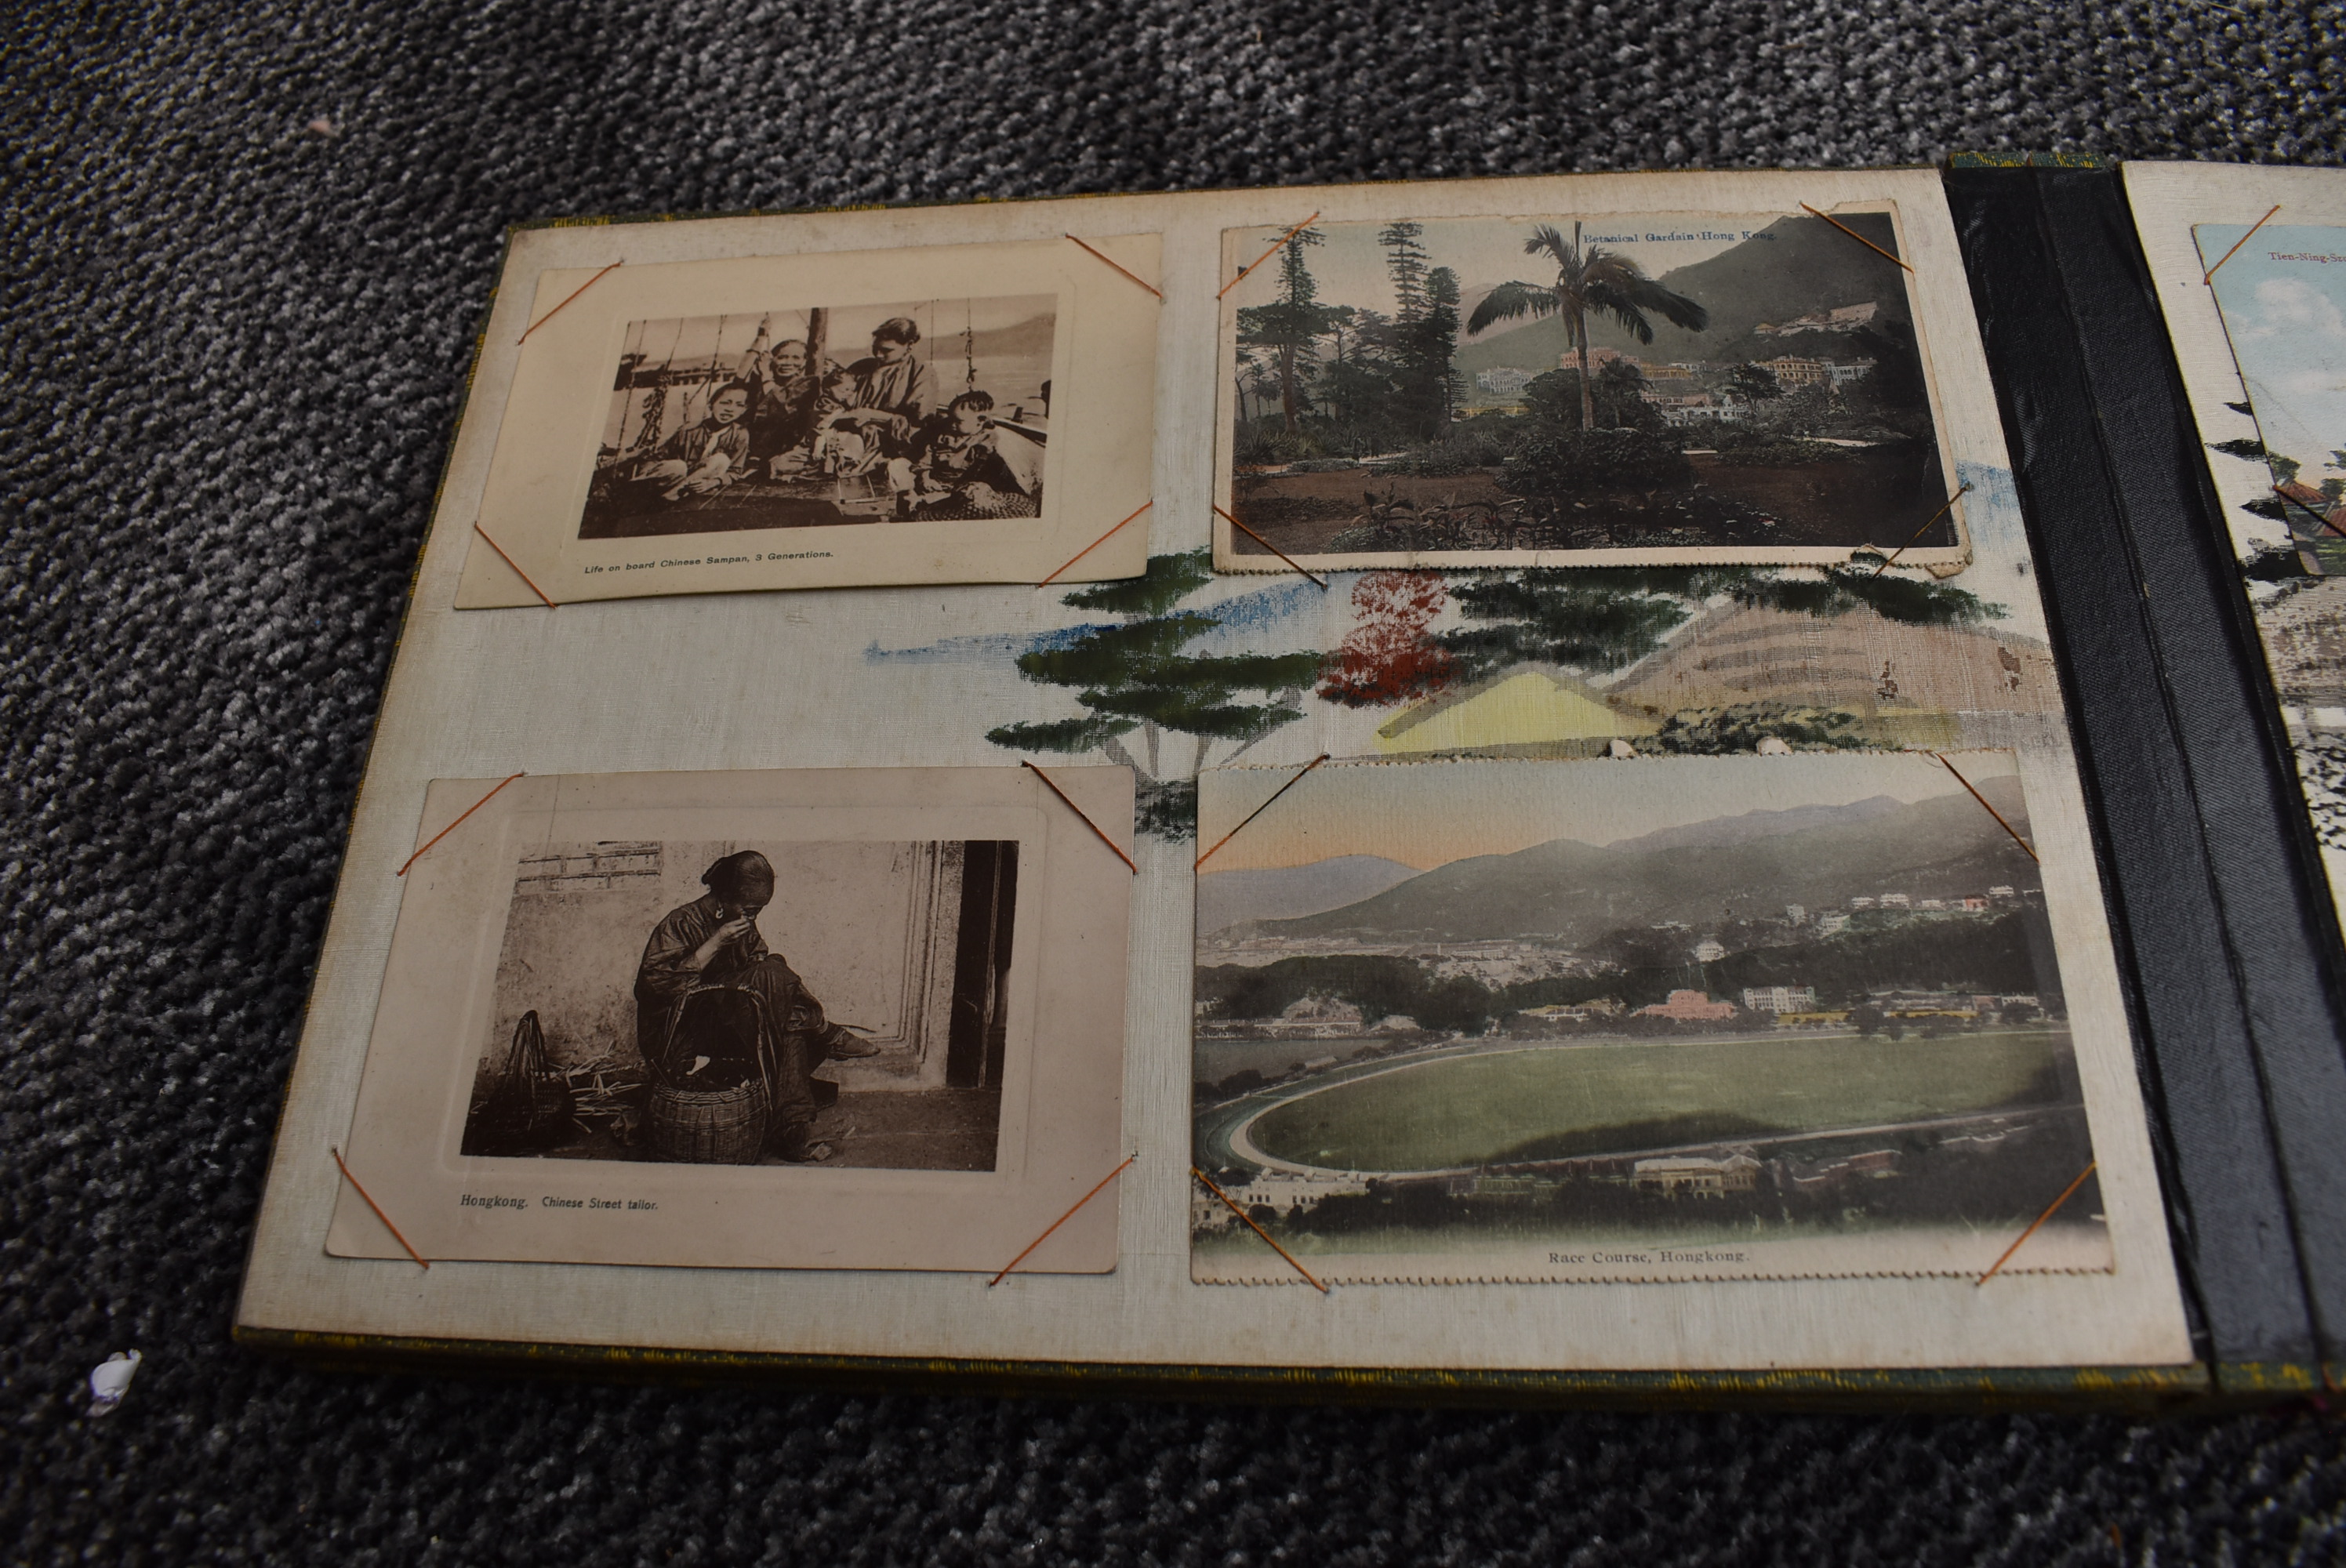 A large Chinese Postcard Album containing early Hong Kong & Chinese Postcards including street, - Image 27 of 32